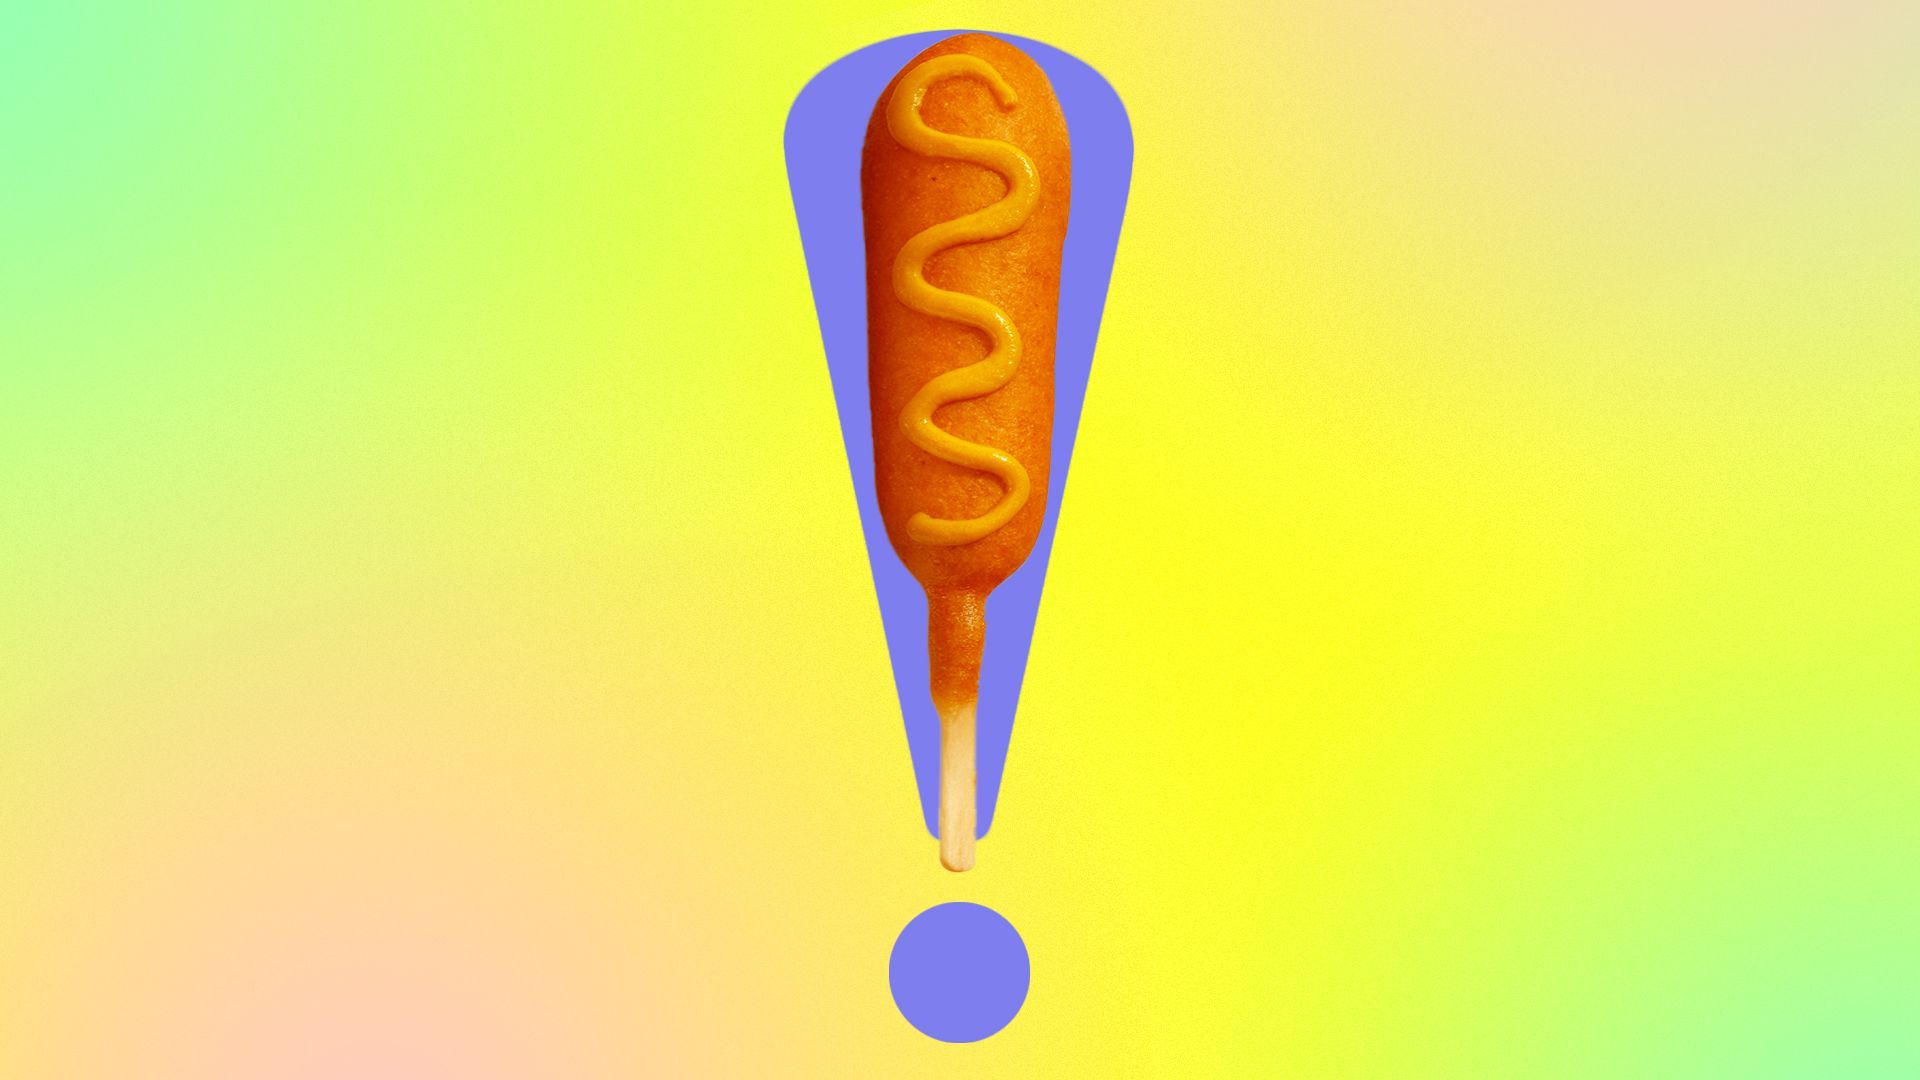 Illustration of a Corn Dog Standing on an Exclamation Mark